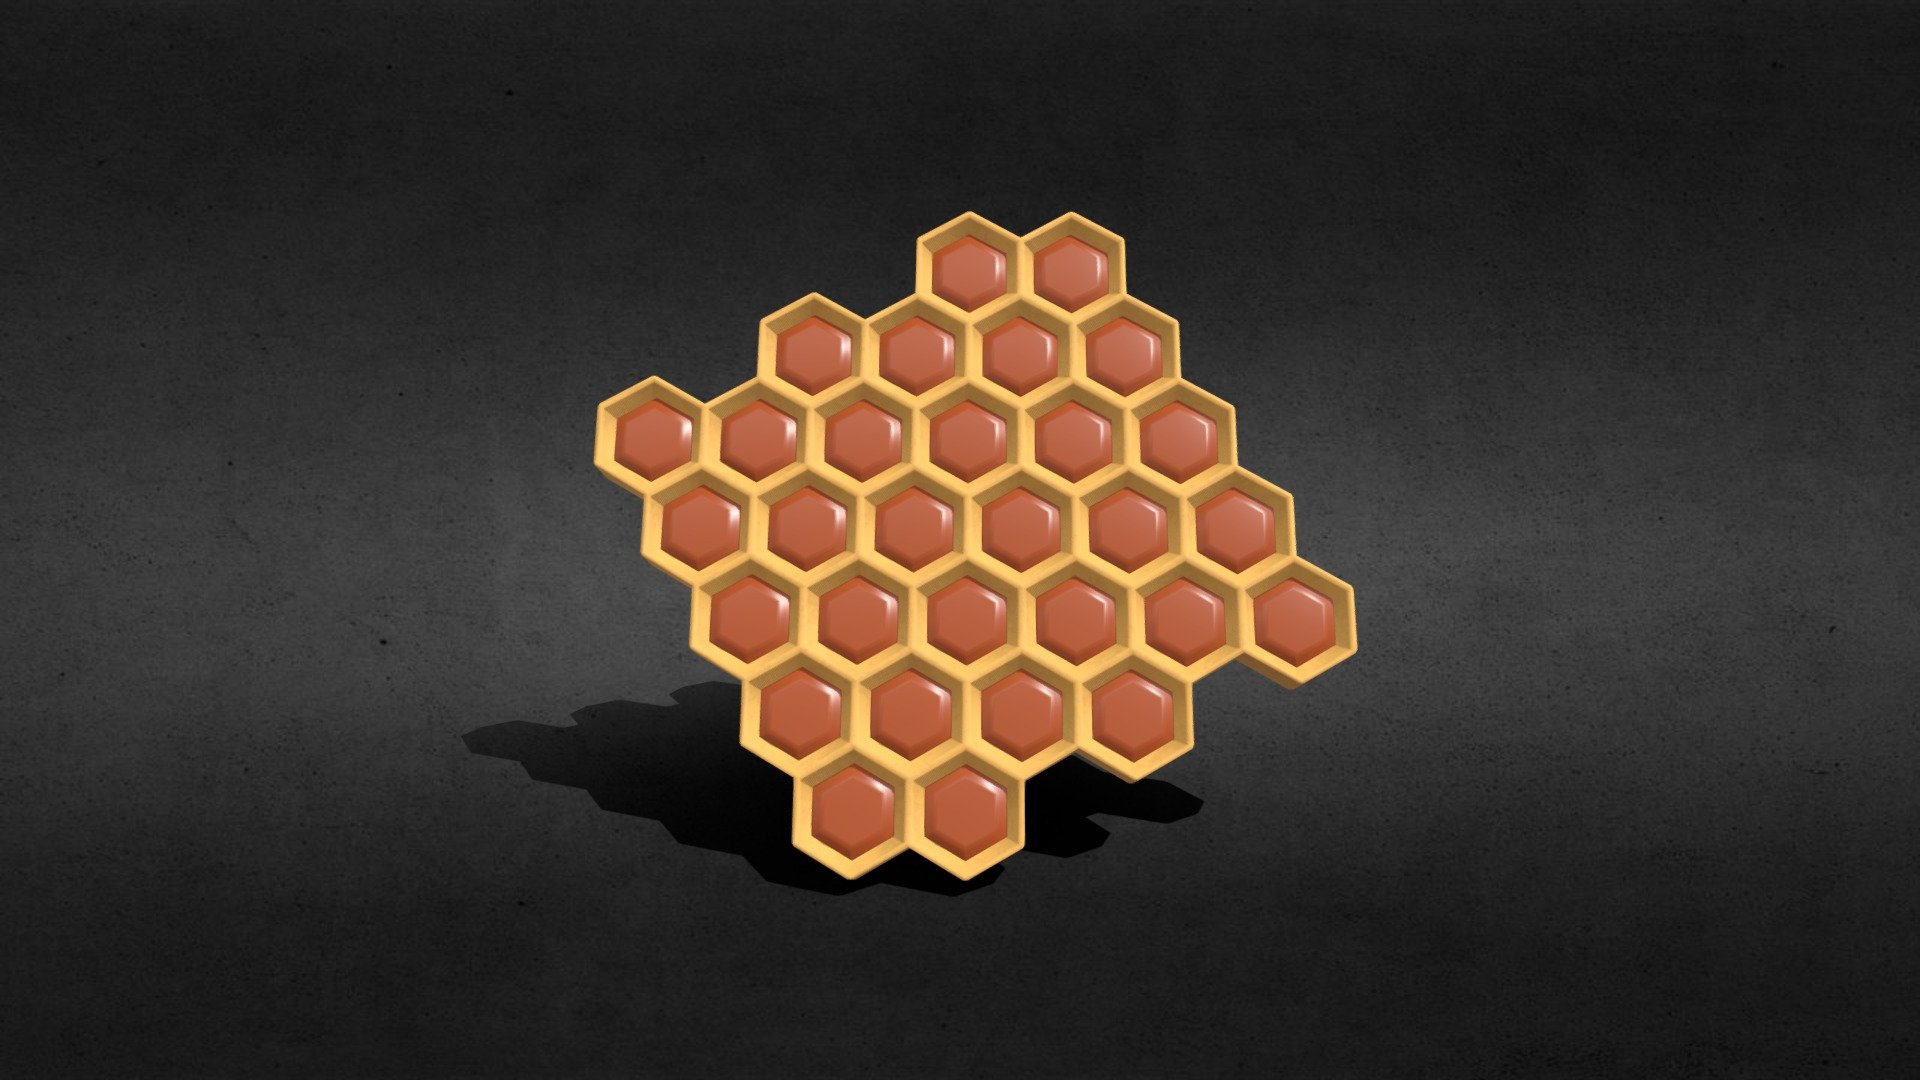 Created a model of a Honeycomb by using Blender. Preview images were rendered with Blender Eevee.

Polygon Count




Faces: 3.530

Vertices: 3.150

Pack Includes &amp; File Formats




Blender file v3.0.0 (.blend): Honeycomb.blend

FBX file: Honeycomb (FBX Model)

OBJ file: Honeycomb (OBJ Model)

Three Textures

Second Materials

Enjoy the product and leave a comment 3d model